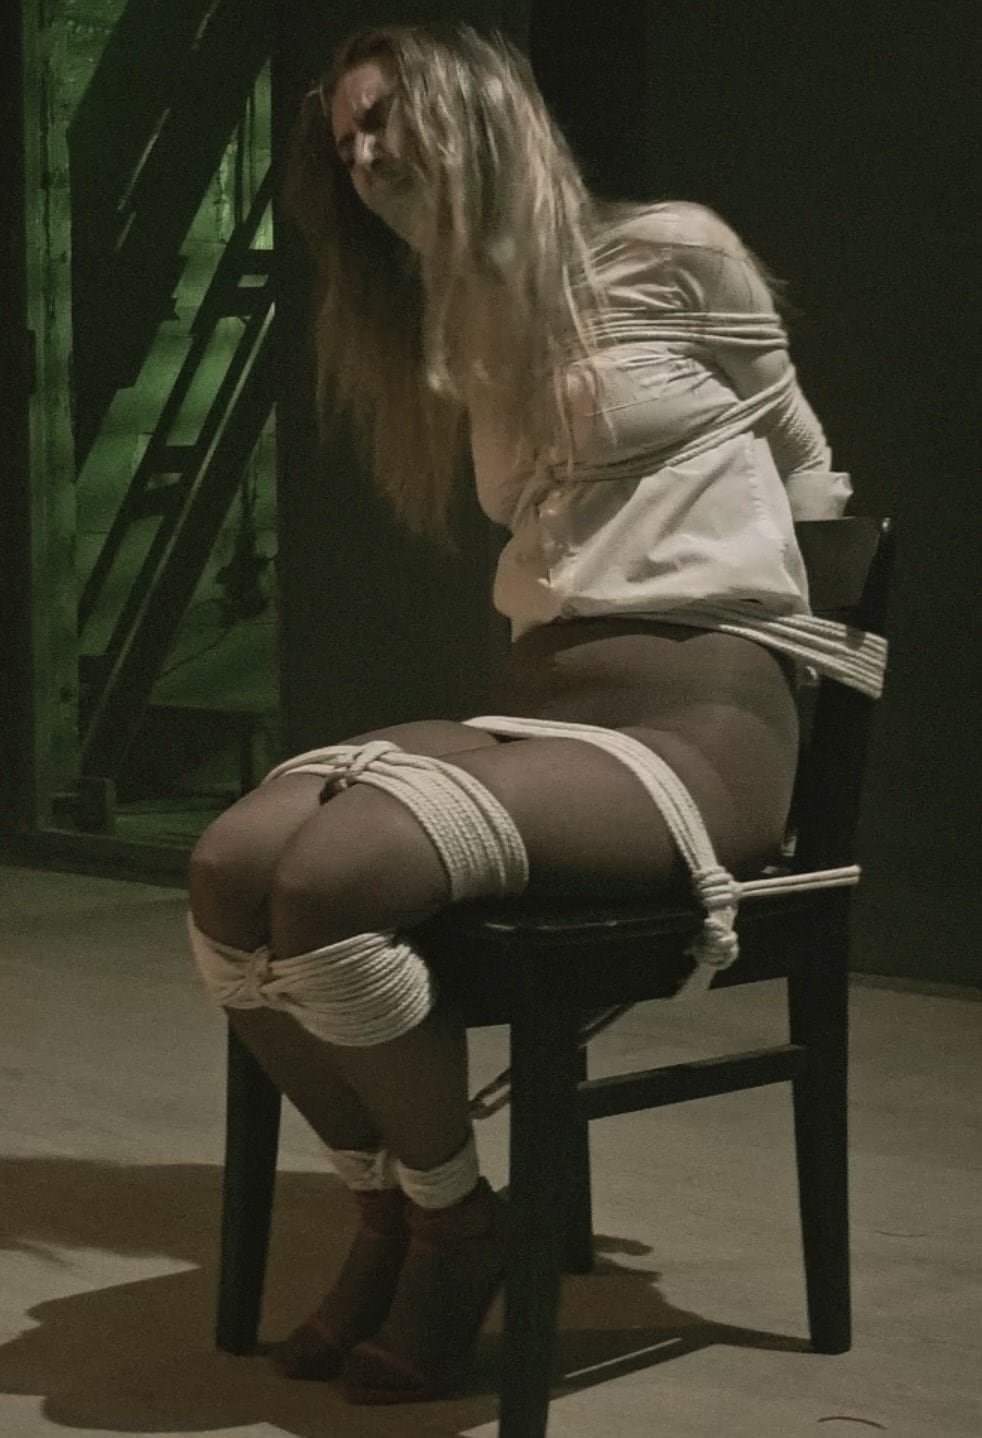 Katrina got into a trouble - Chair tie and tight tape gag with a sponge